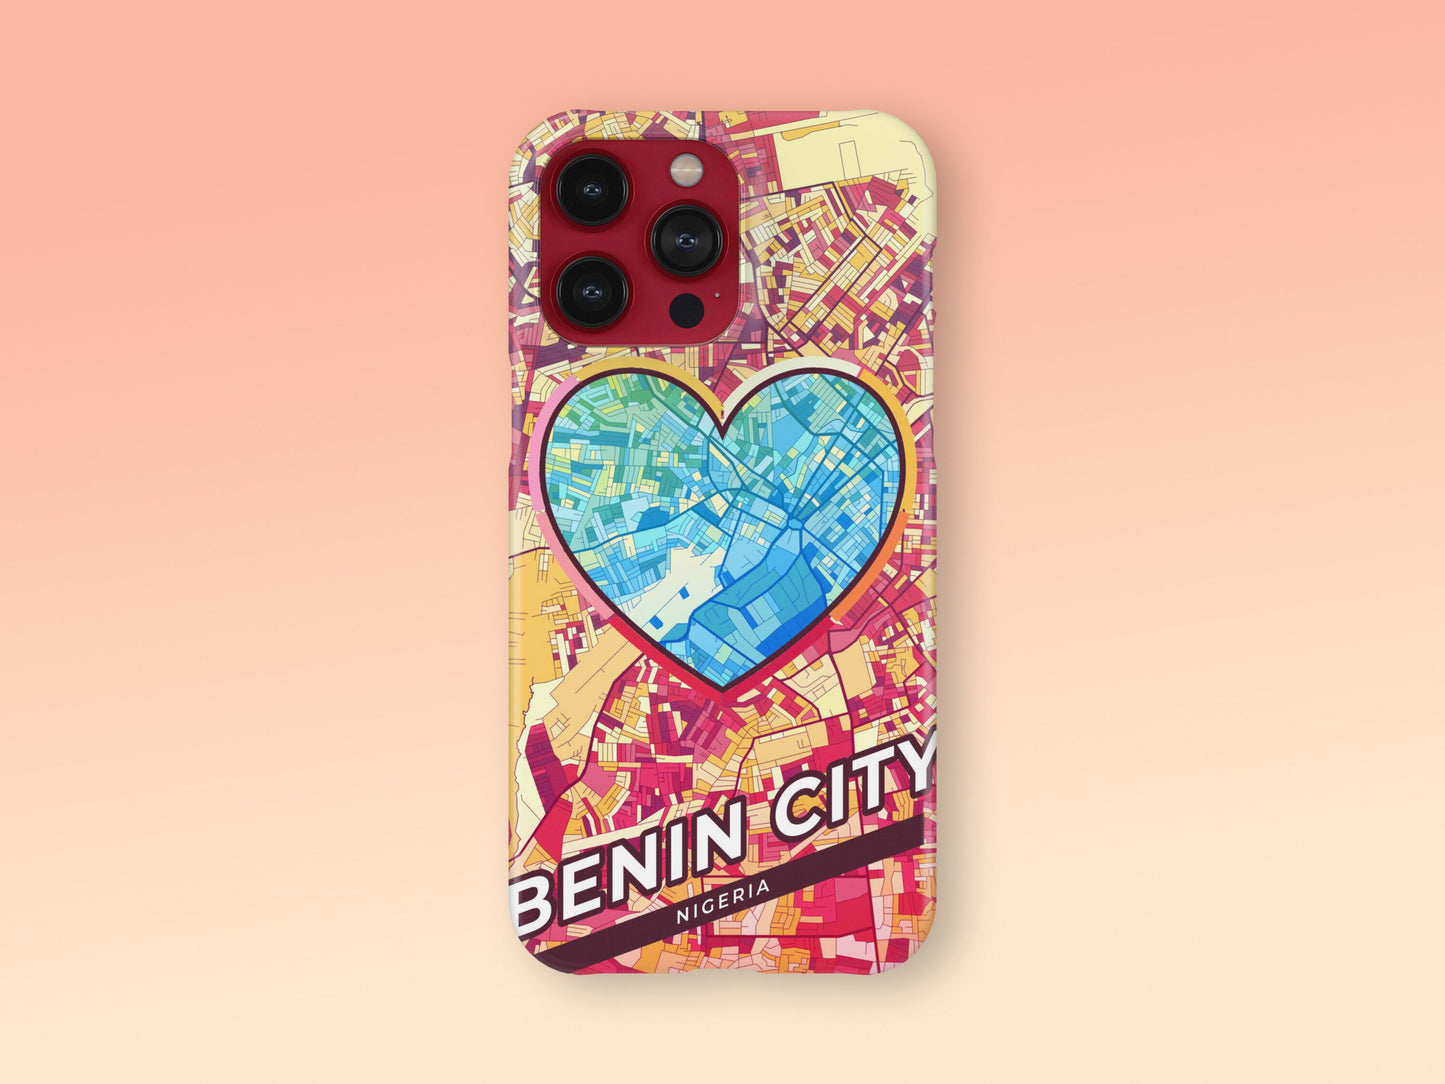 Benin City Nigeria slim phone case with colorful icon. Birthday, wedding or housewarming gift. Couple match cases. 2